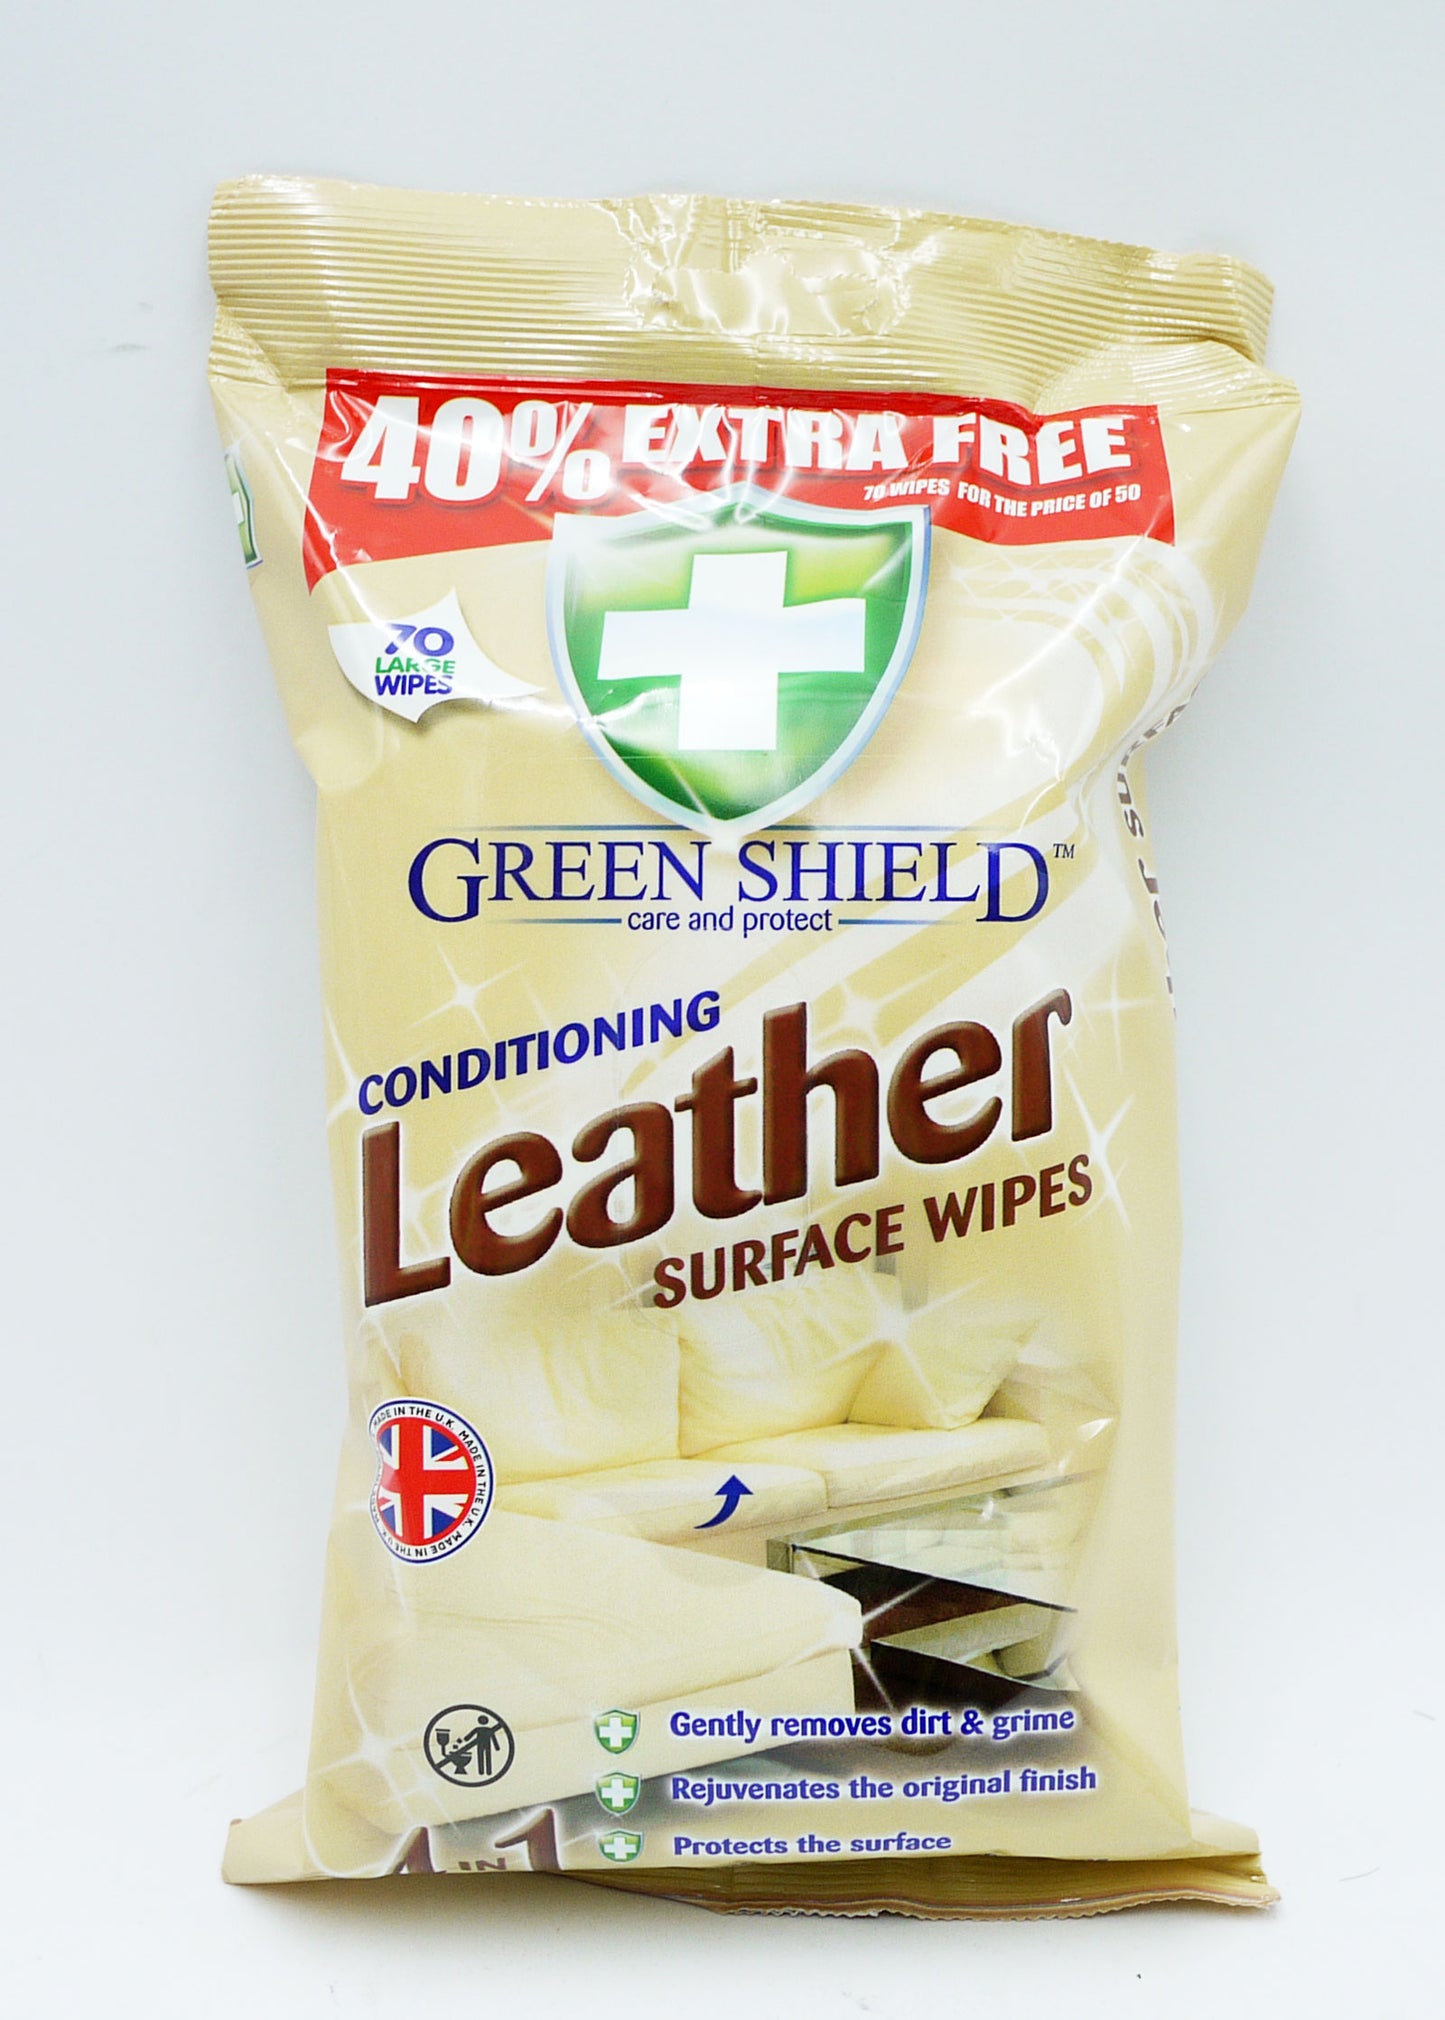 £1.49 Greenshield Leather Wipes (12)